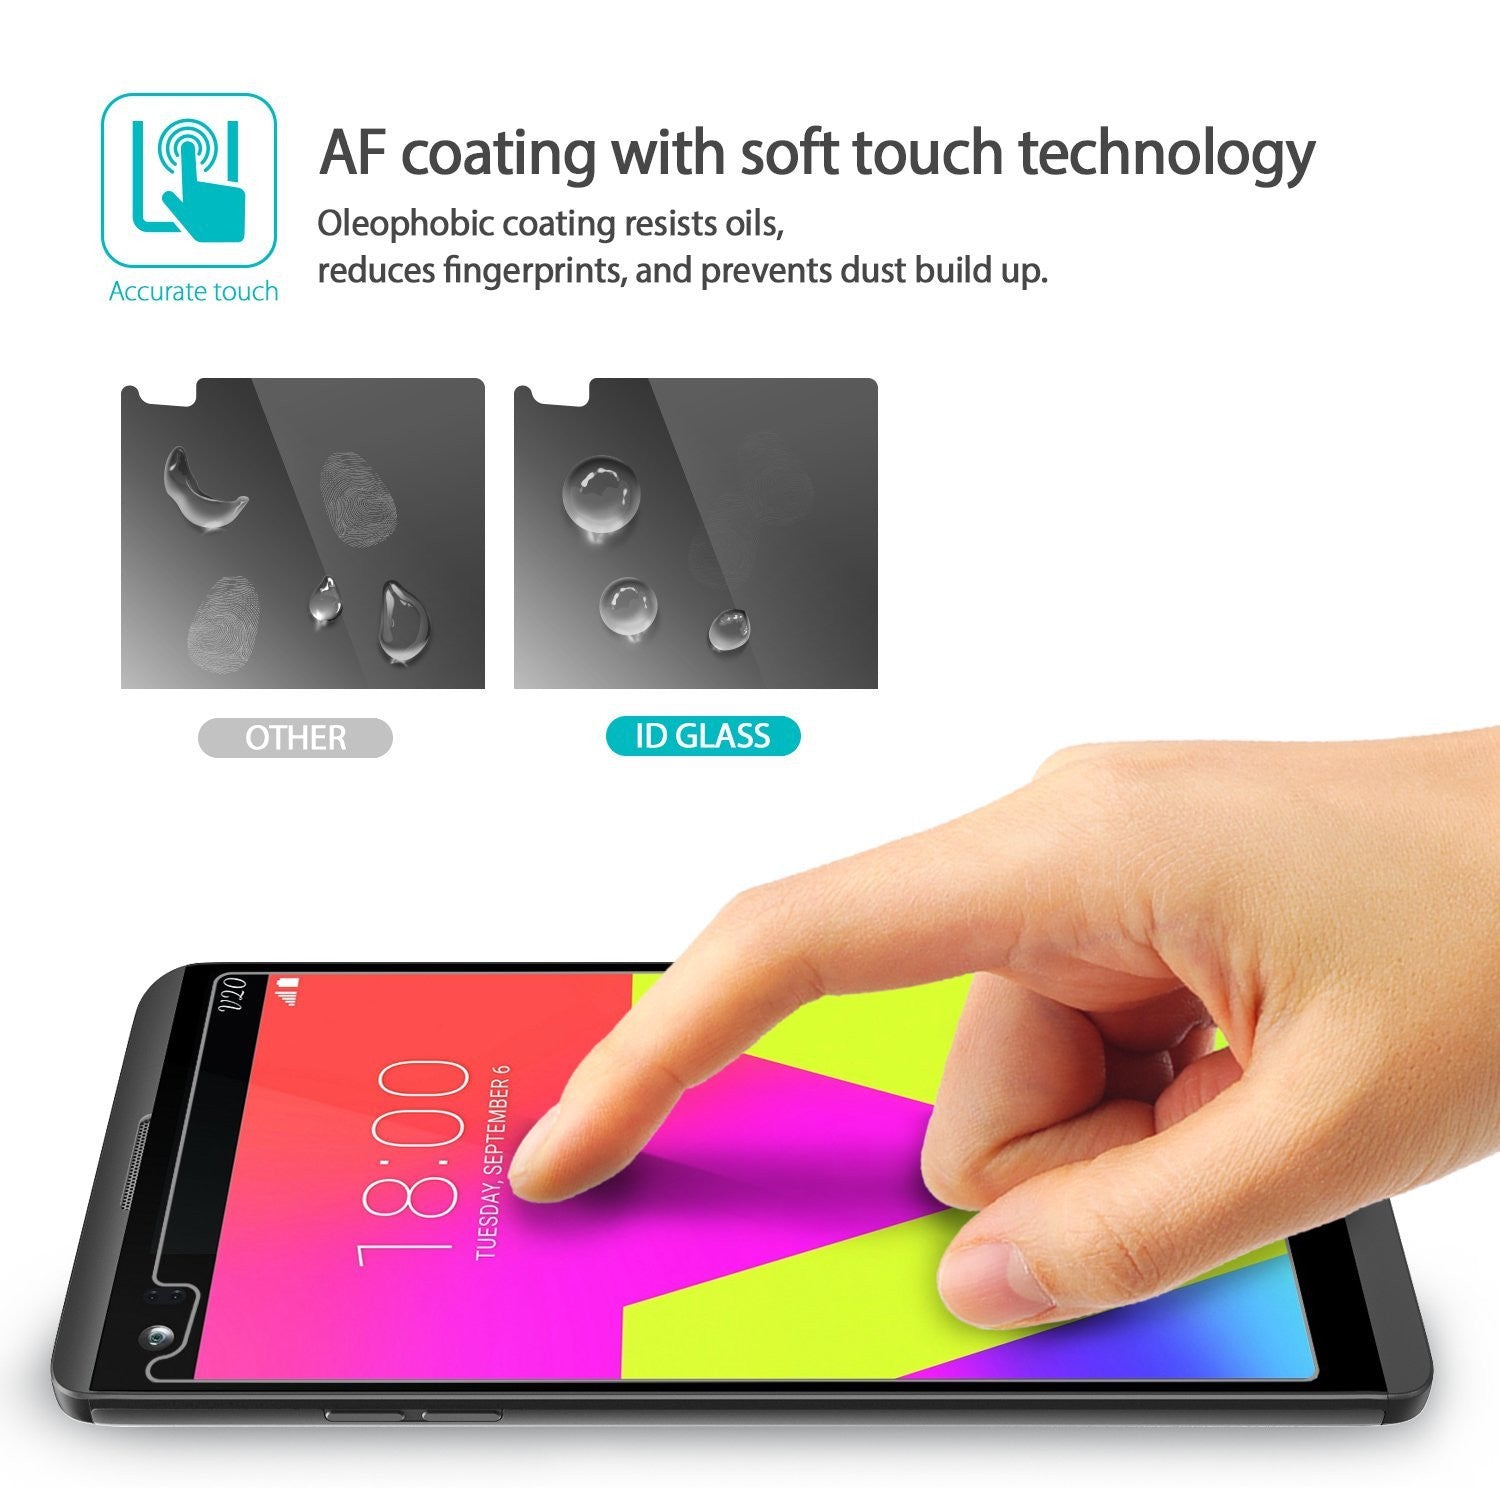 af coating with soft touch technology